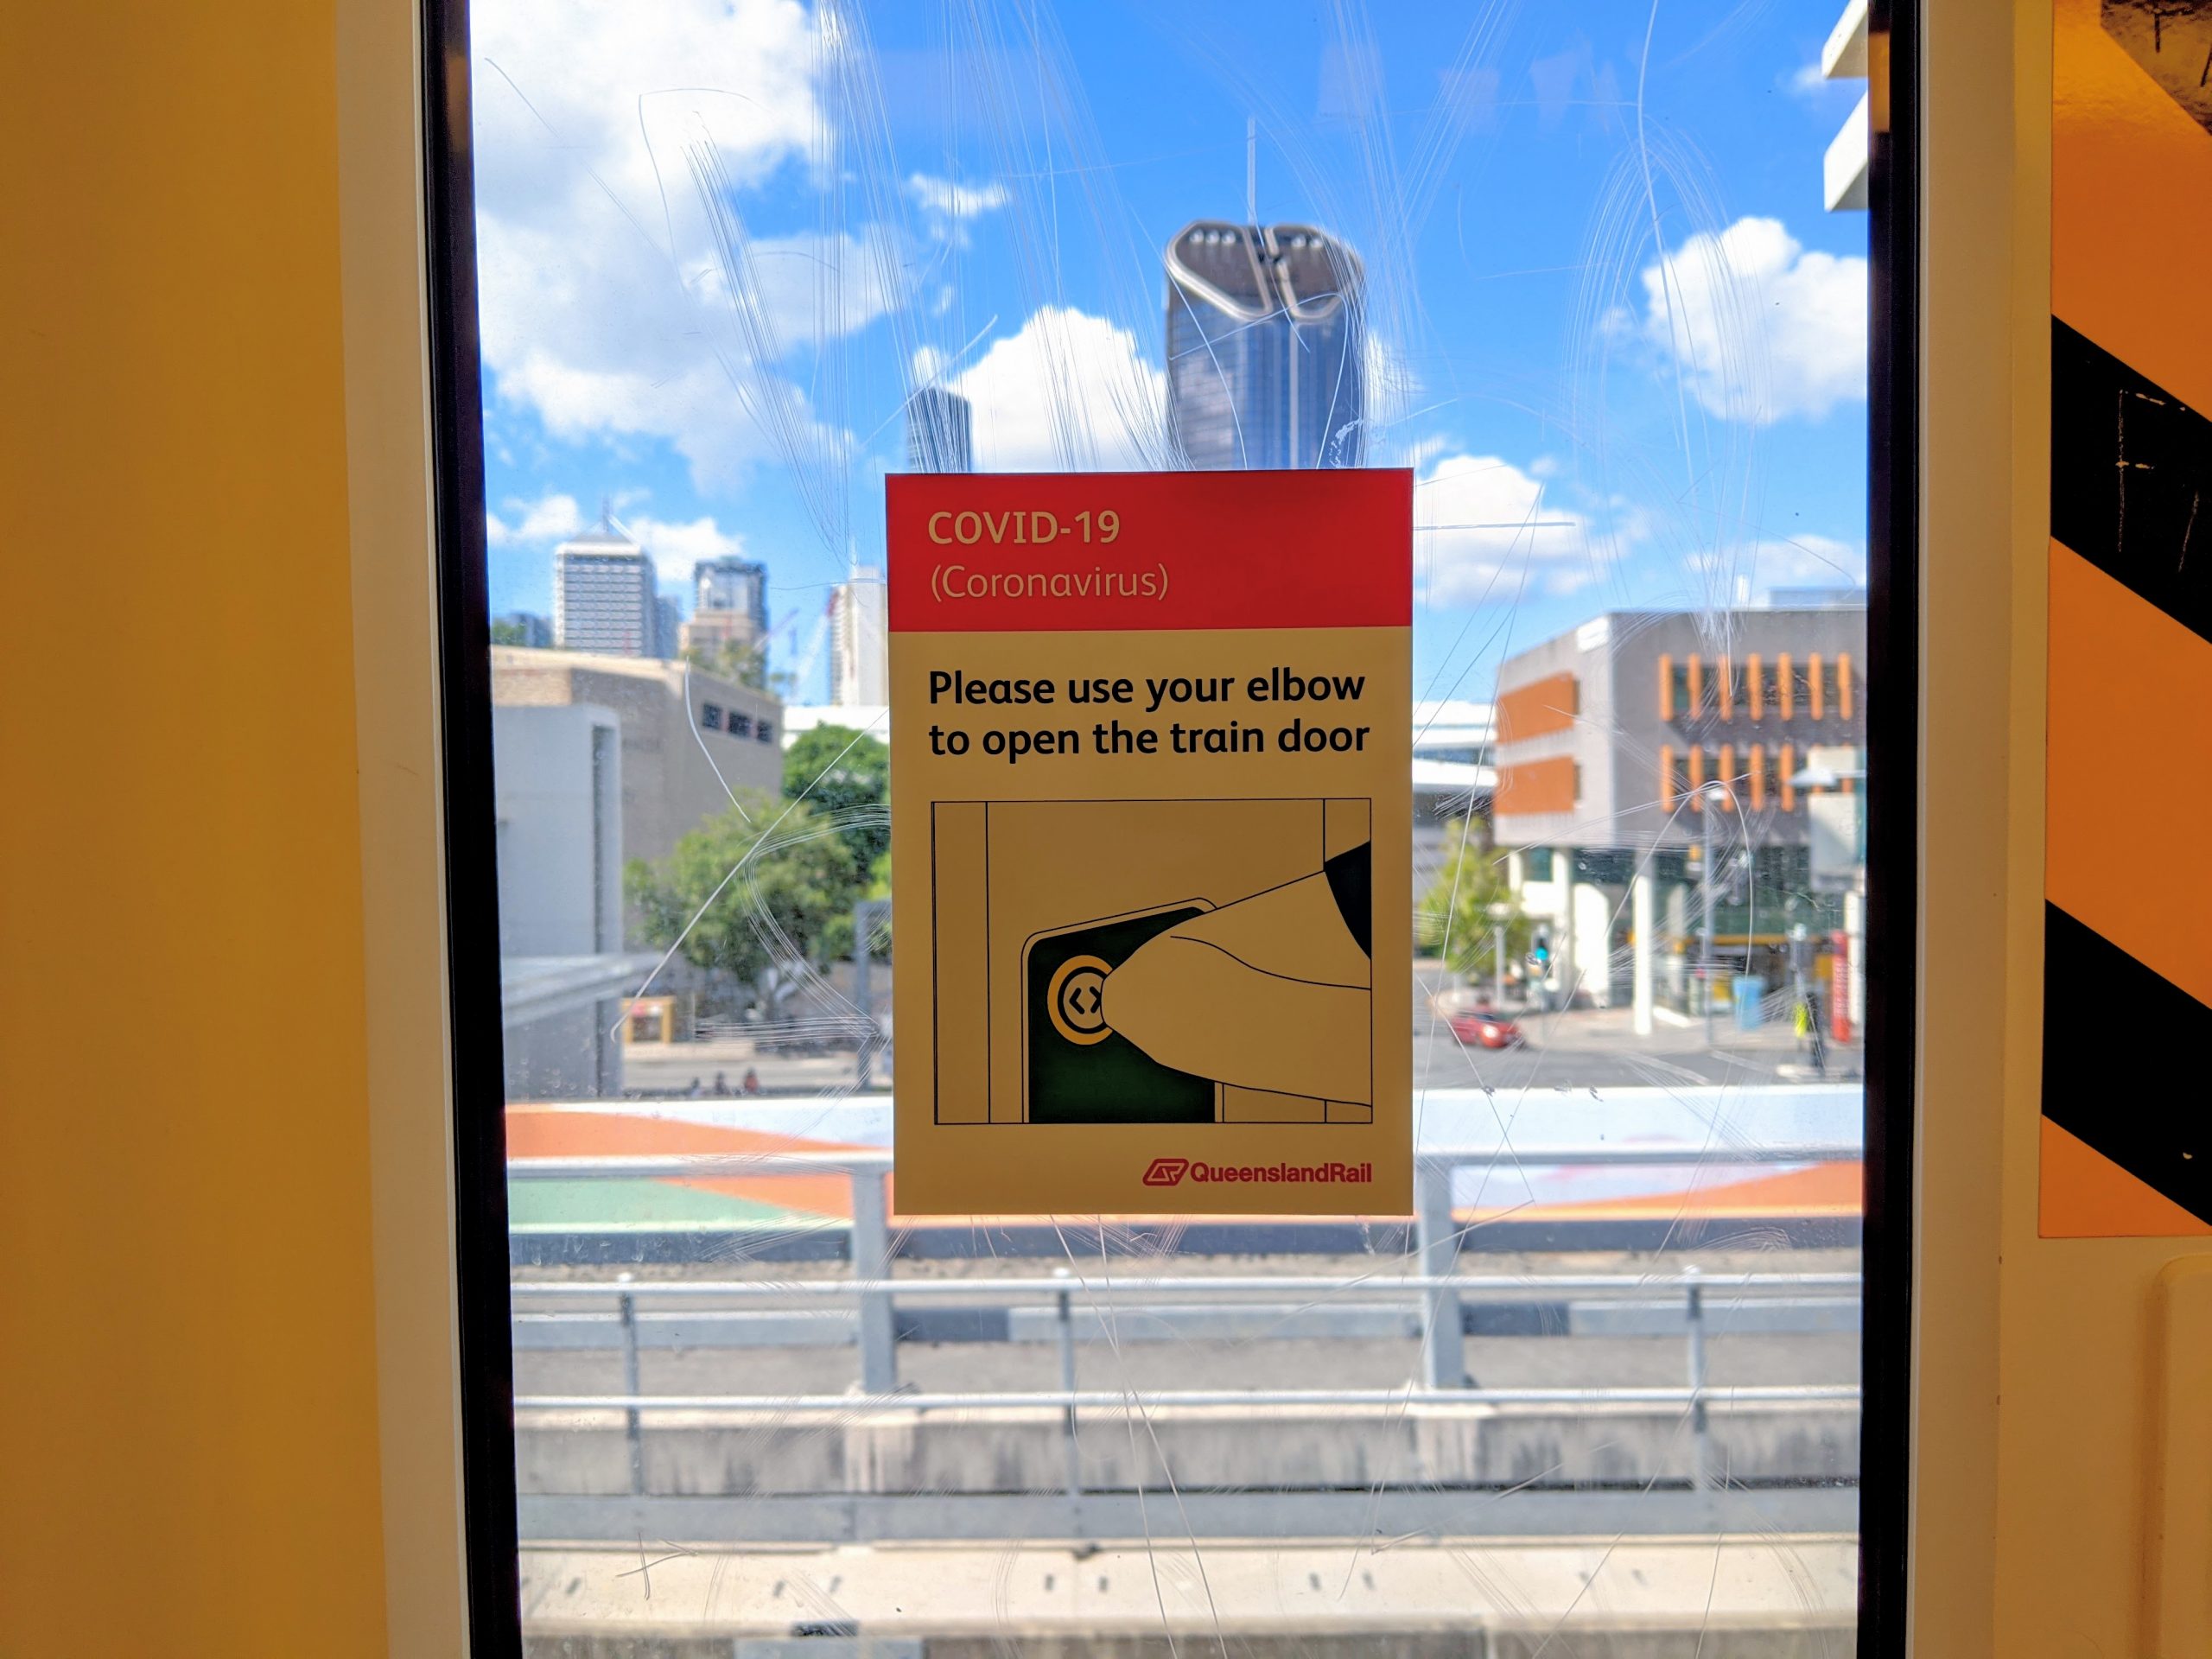 Looking out the train window. Brisbane City in the background. Sticker on the window: "Please use your elbow to open the train door"